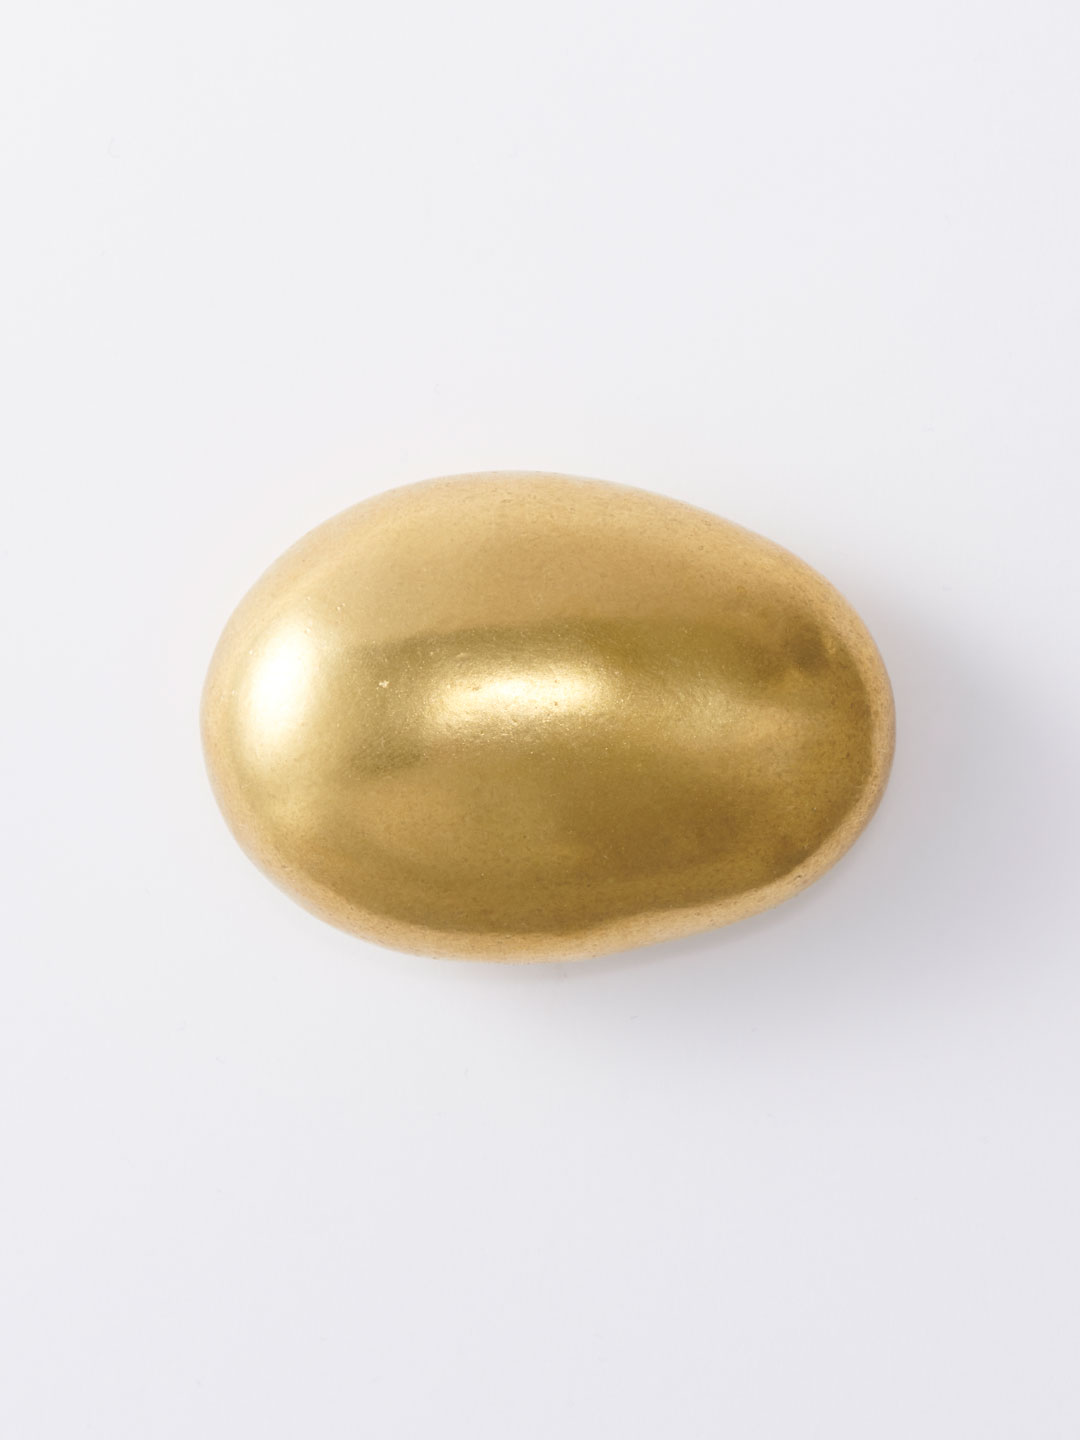 Paper Weight 003 - Gold